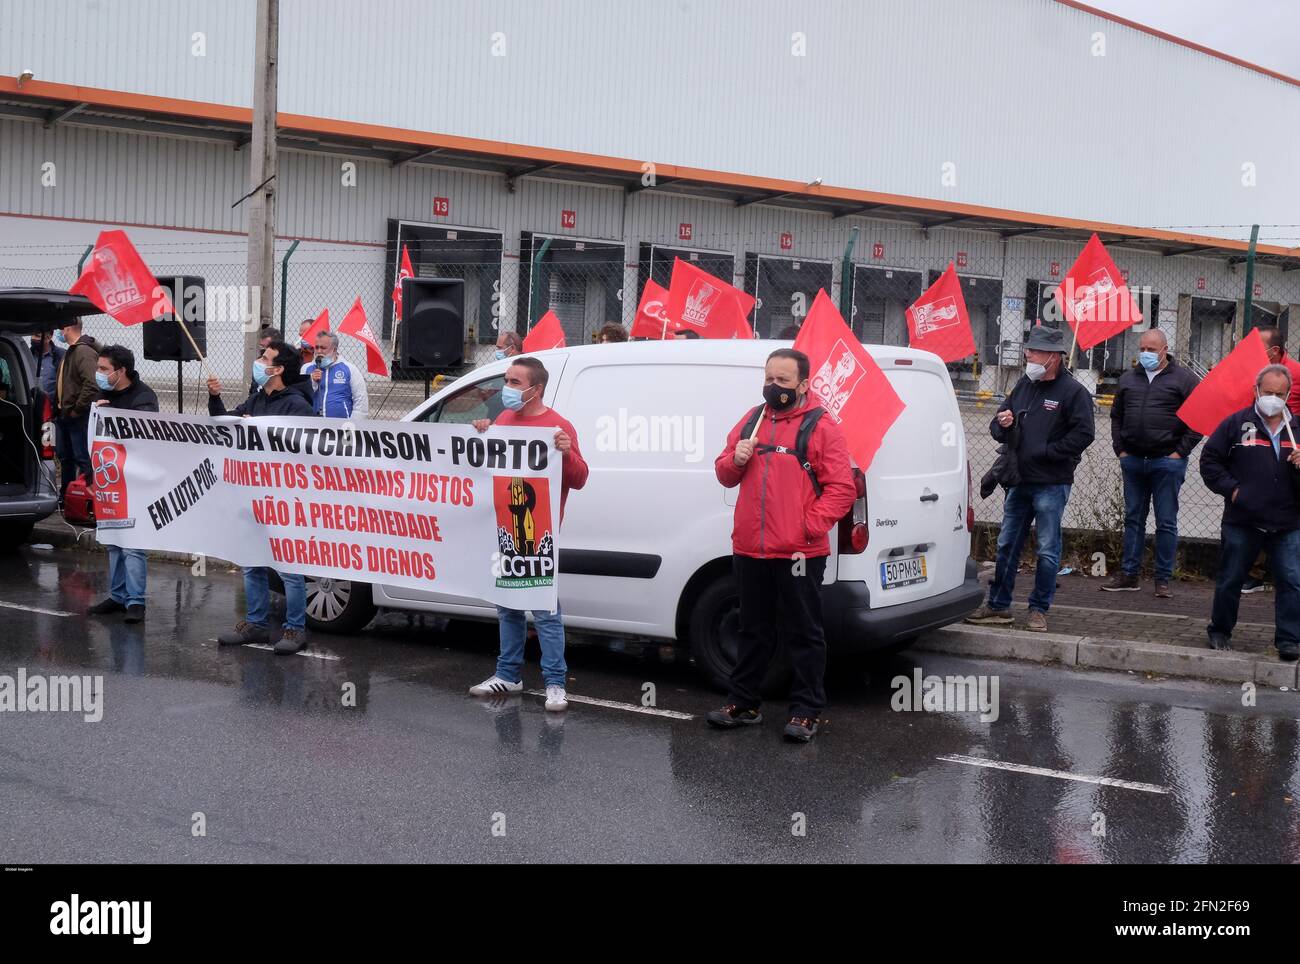 Valongo, 05/13/2021 - Hutchinson workers - Porto promote action to fight  for better wages, in front of the company's facilities in Campo (Valongo).  (Amin Chaar/Global Images/Sipa USA) Credit: Sipa US/Alamy Live News